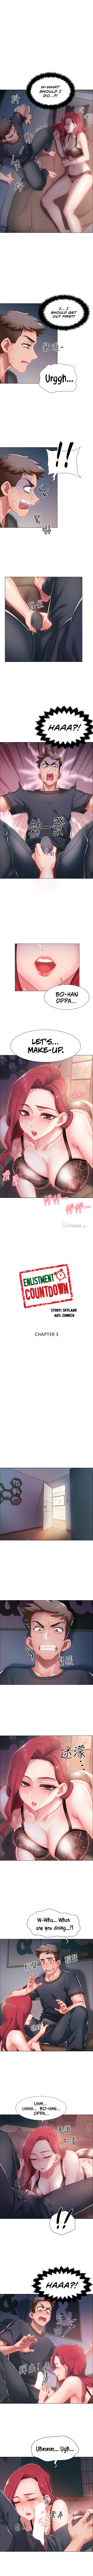 Enlistment Countdown - Chapter 3 Page 2